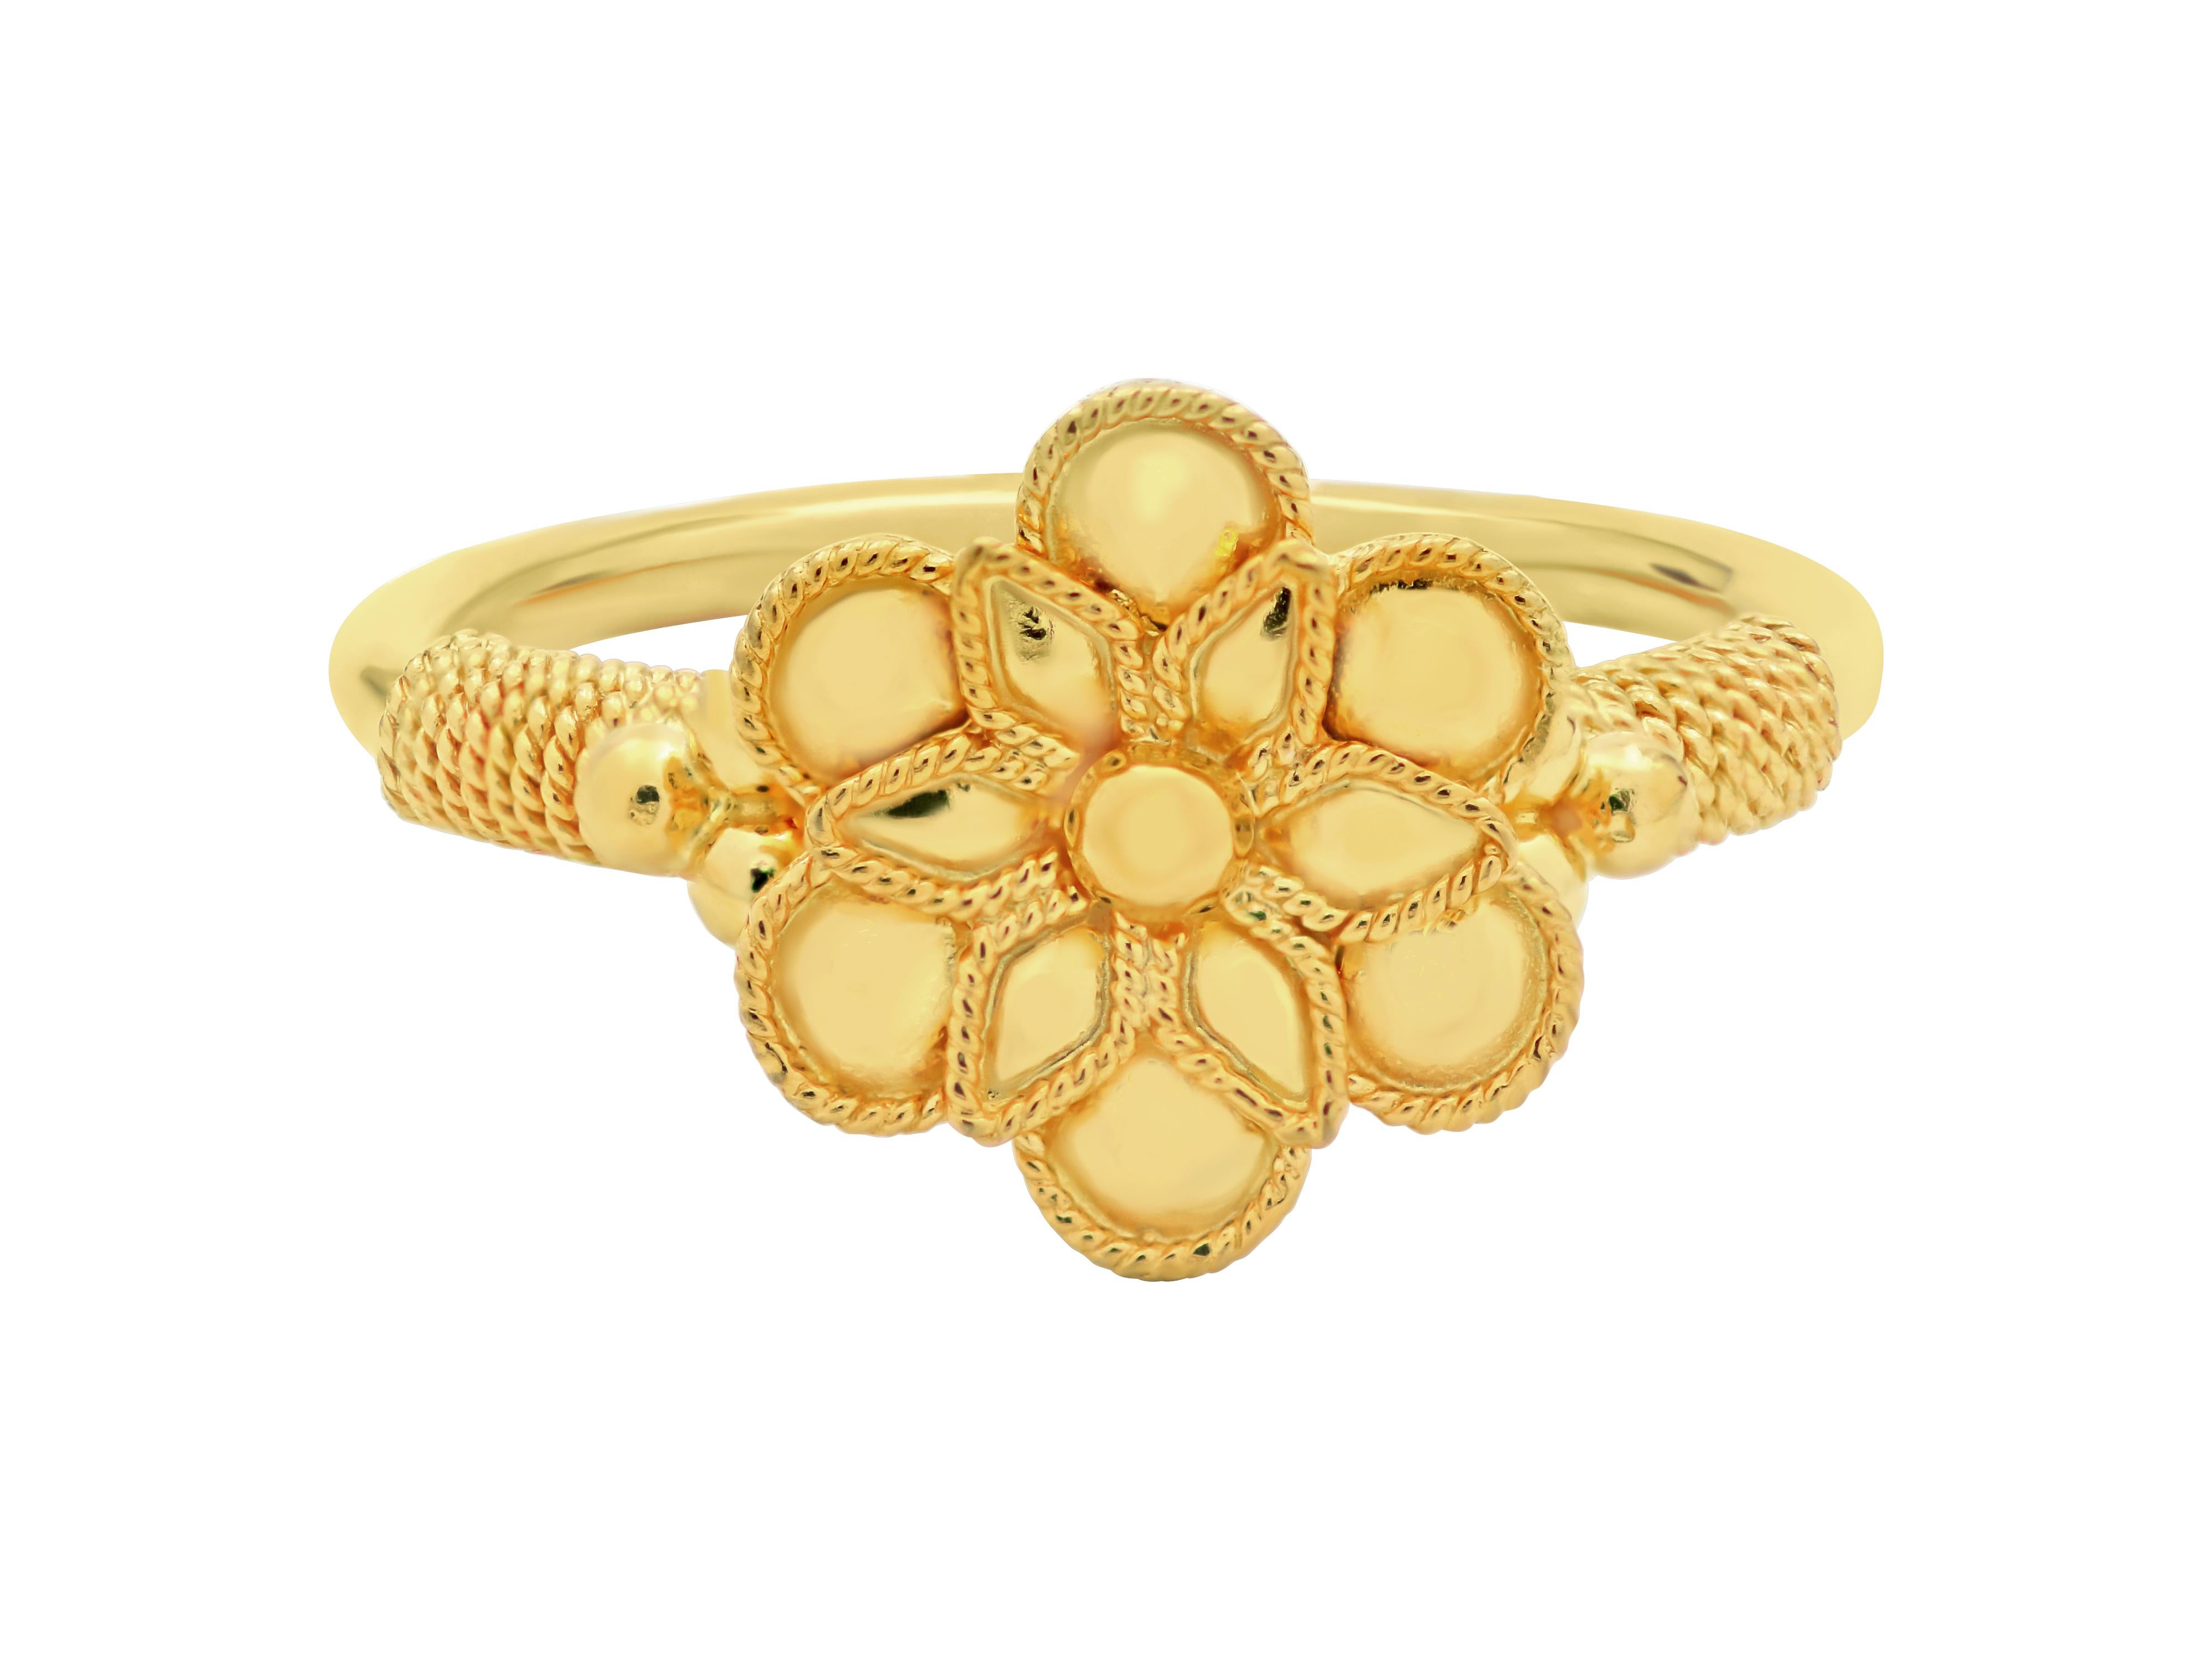 The rosette ring in its double version set in 18k yellow gold. A museum legend that it’s been so presented in our history here in a double leaf with filigrees. Thin band for comfort wear also with filigree decoration.